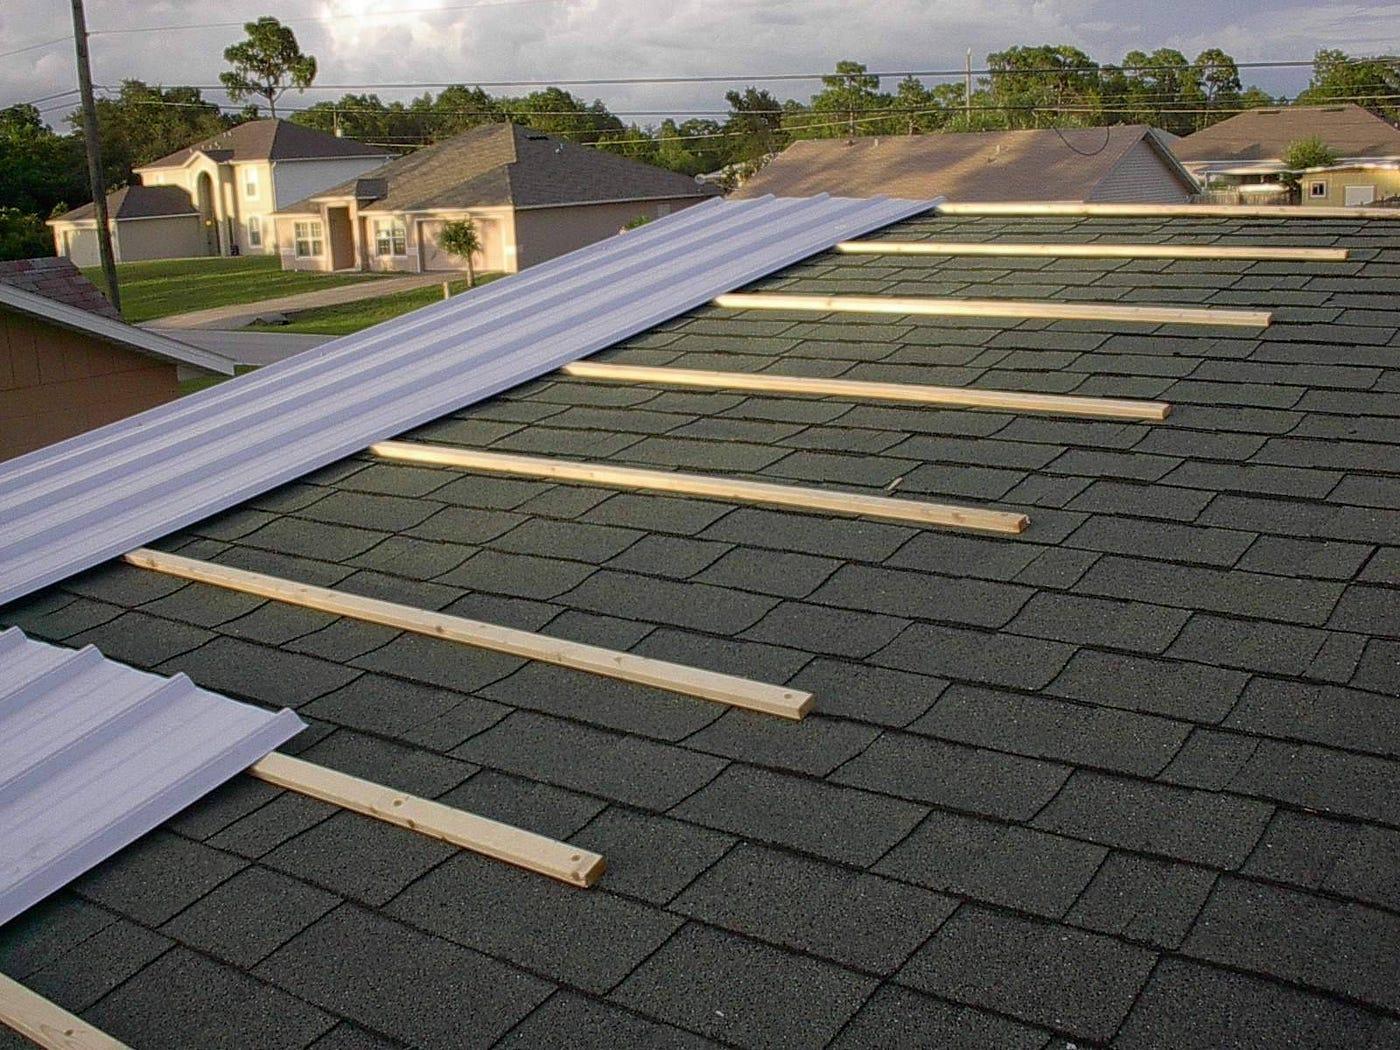 Can You Put a Metal Roof Directly on Top of Shingles?